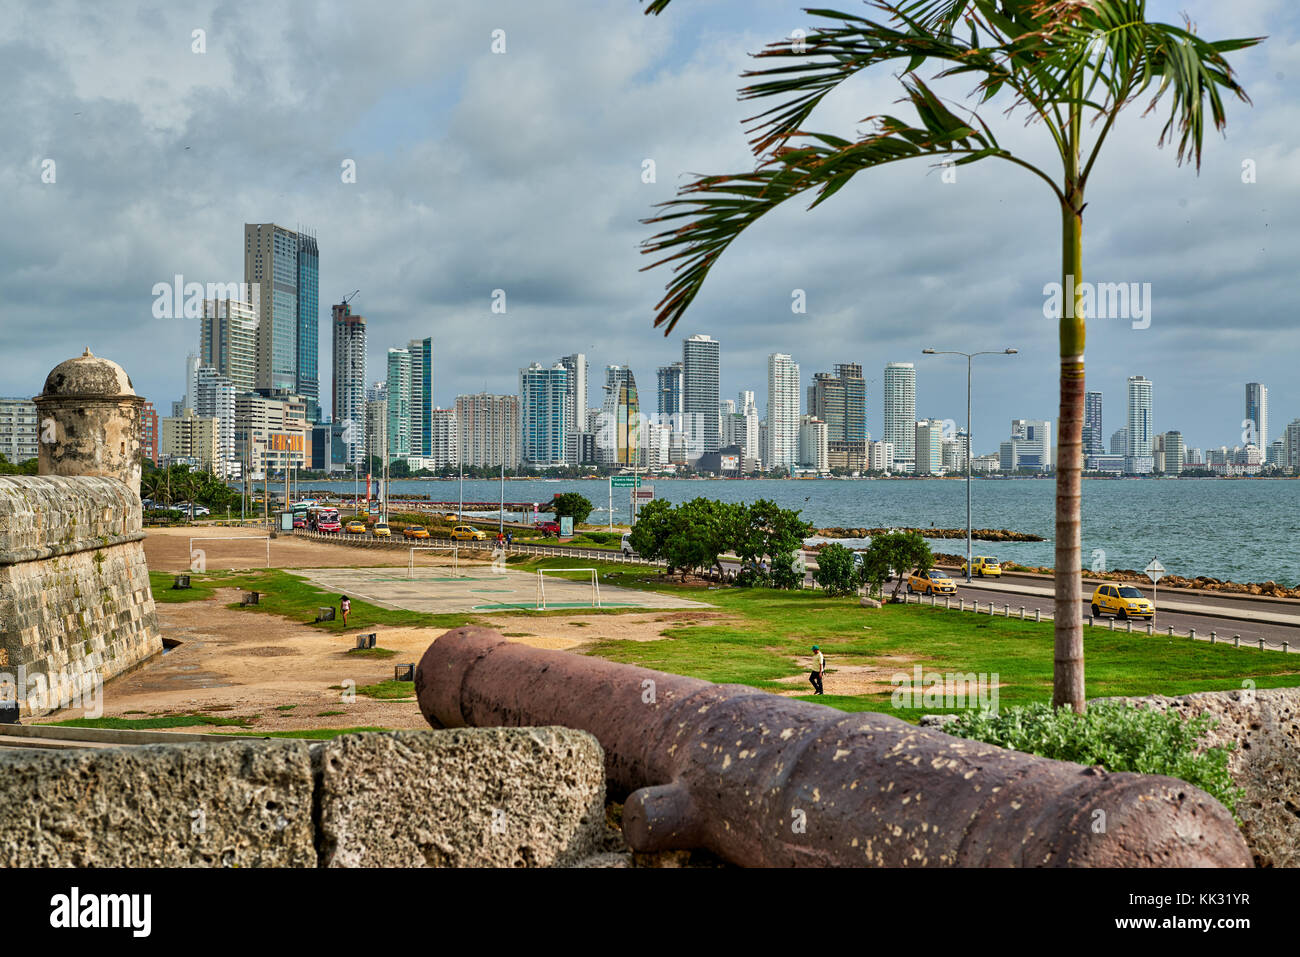 view over cannon of old town to skyline of new district Bocagrande, Cartagena de Indias, Colombia, South America Stock Photo